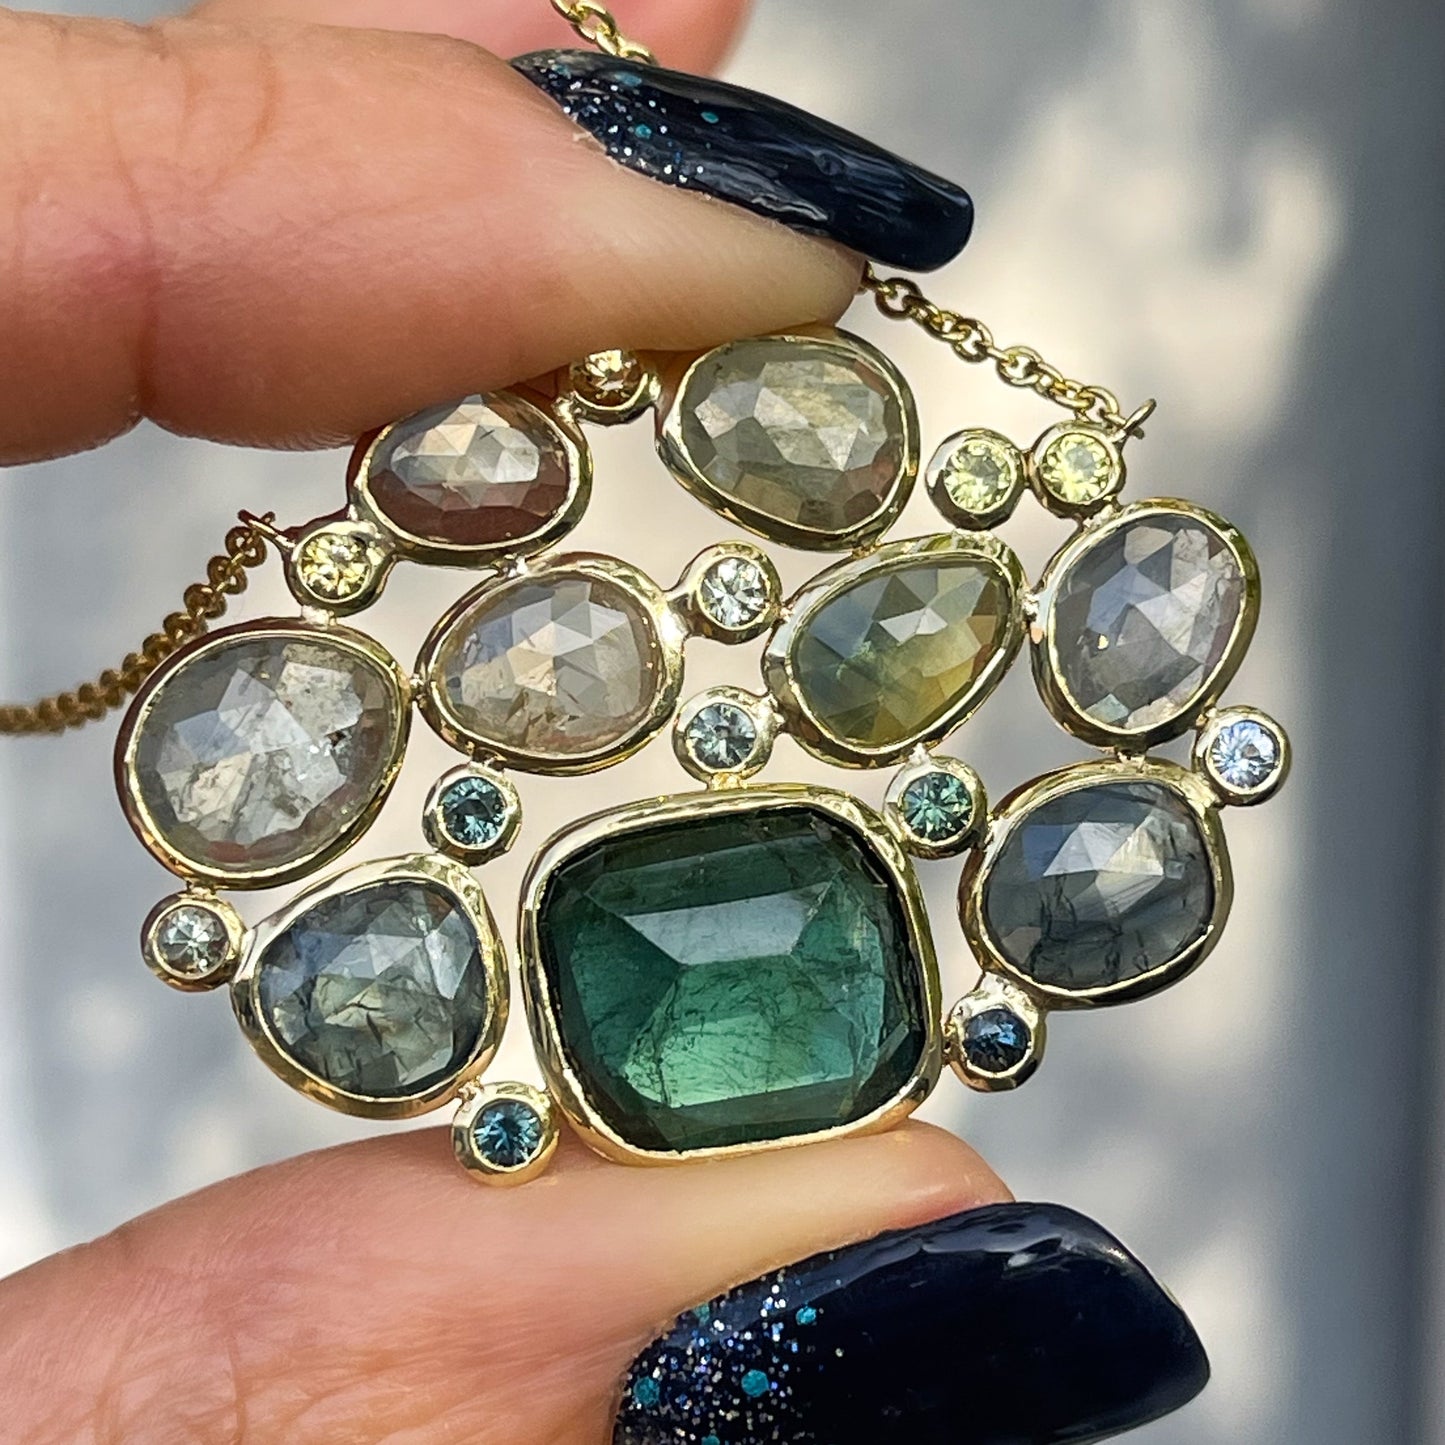  A Tourmaline and Sapphire Necklace by NIXIN Jewelry with green sapphires and a teal tourmaline.